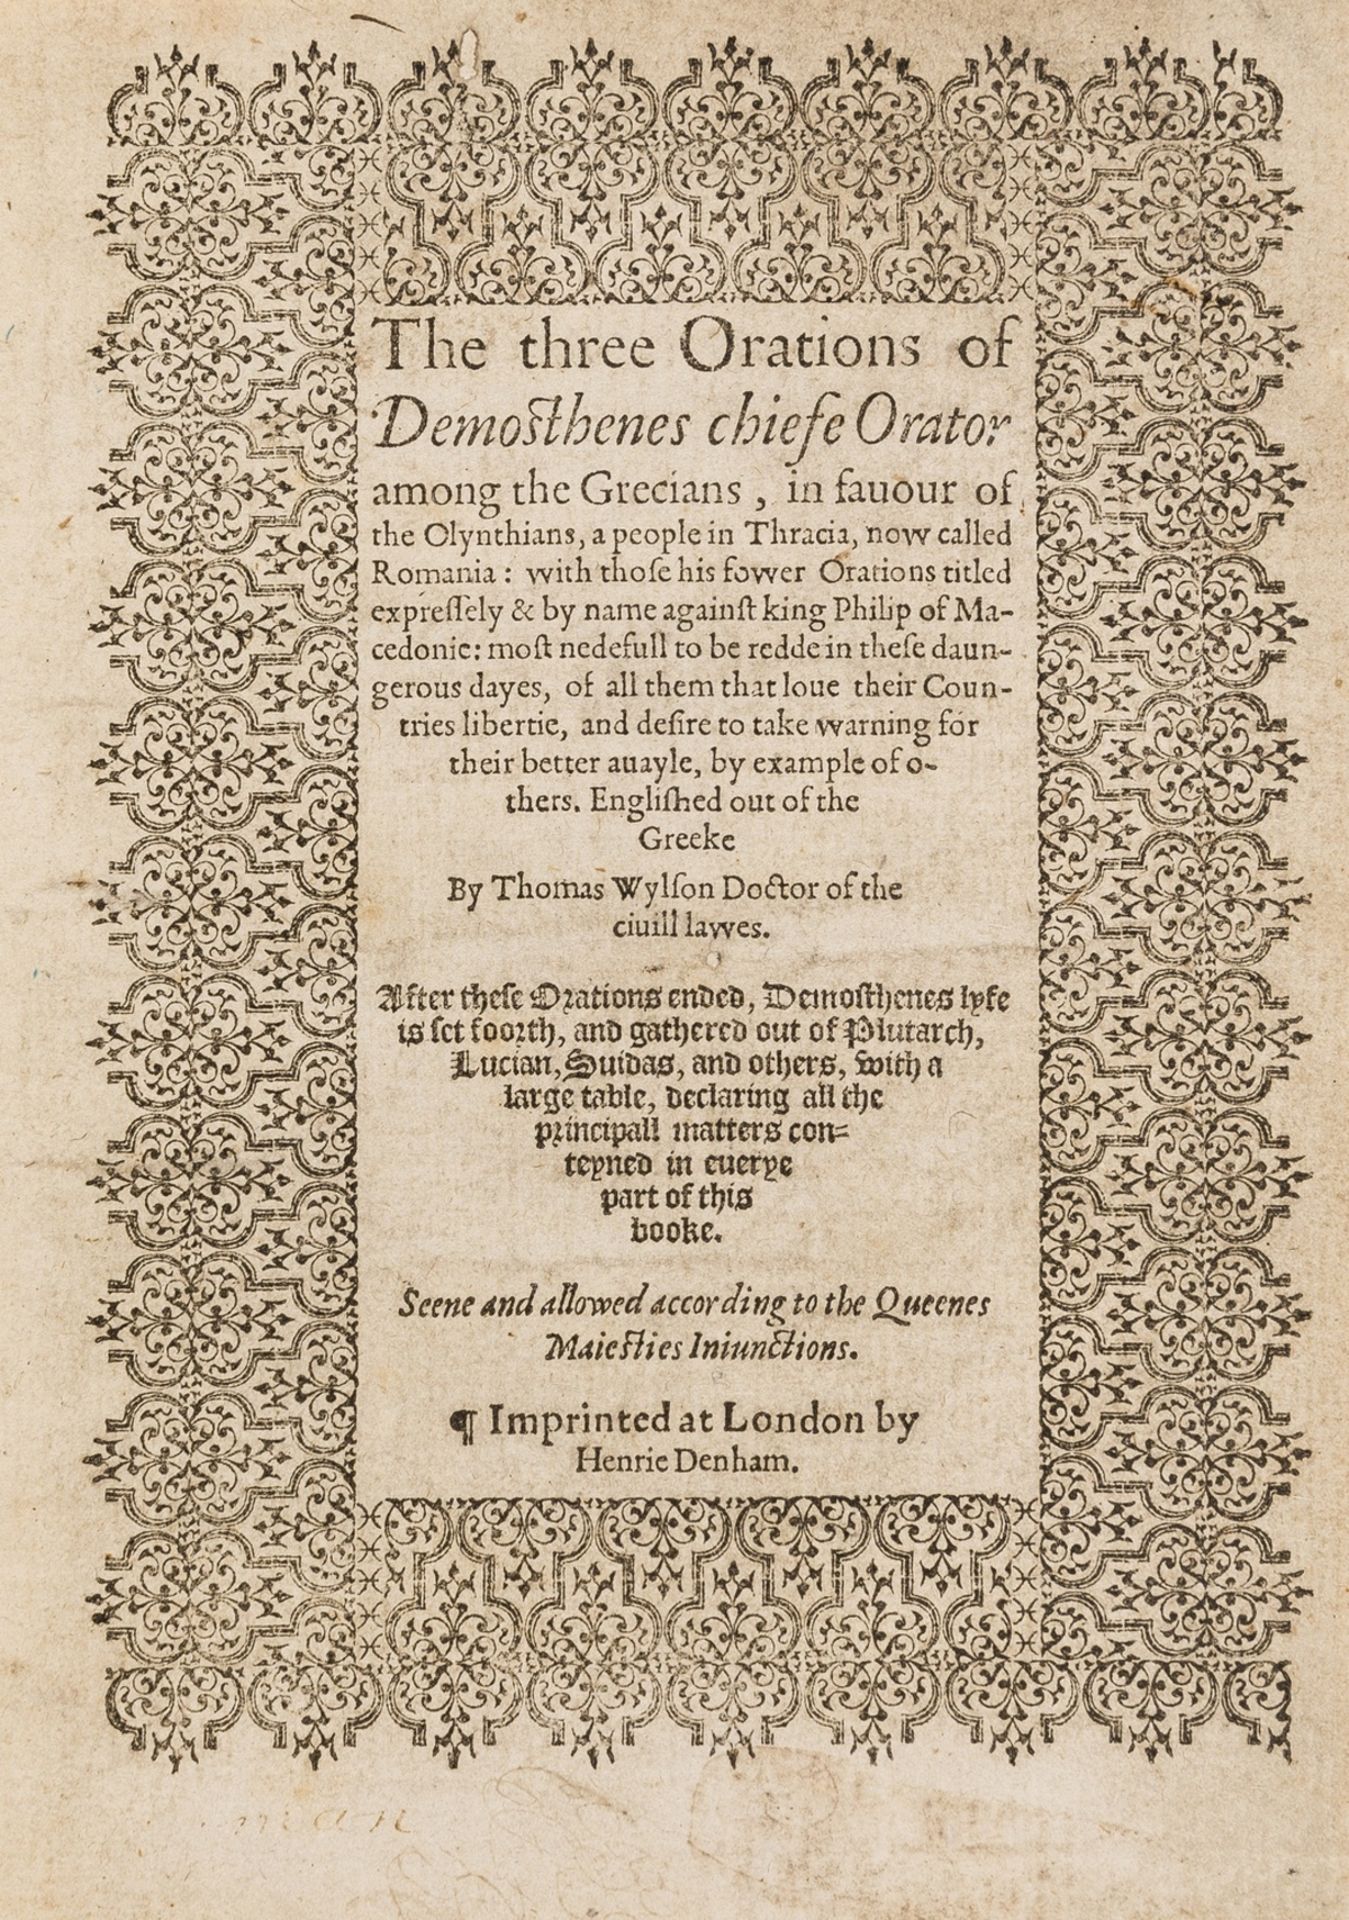 Demosthenes. The Three Orations of Demosthenes, first edition in English, 1570.